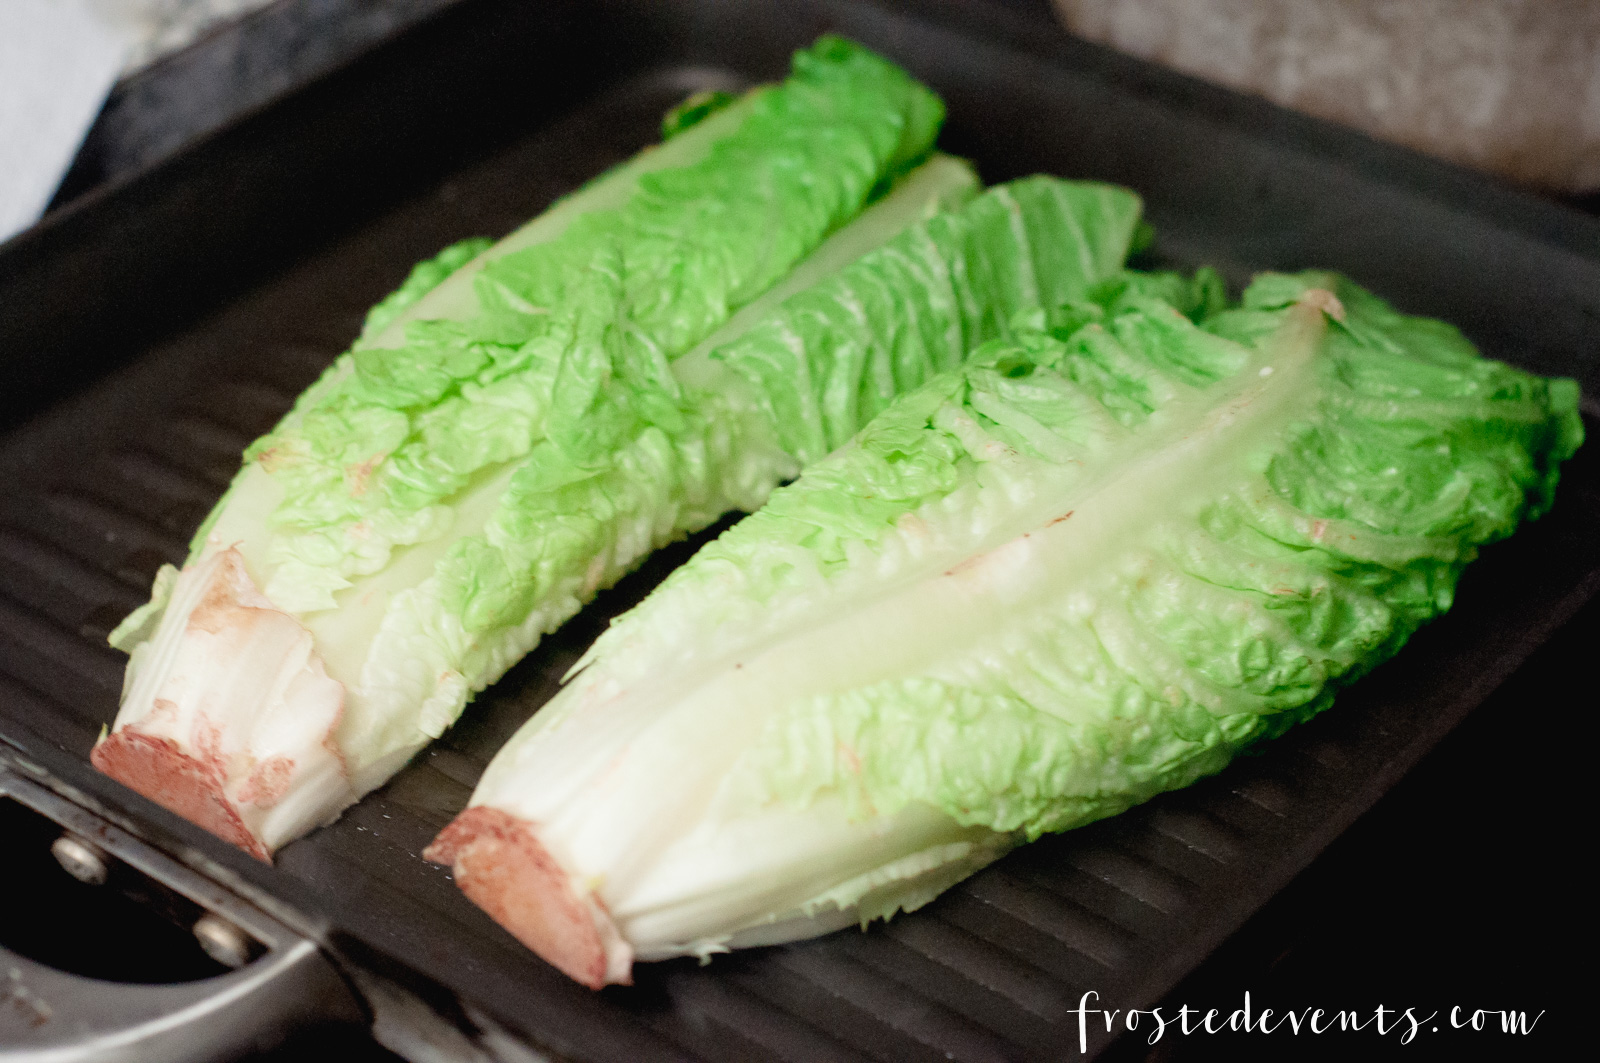 Delicious Recipes Cheese Recipes - Grill Recipes - Roasted Romaine Salad made with real, fresh cheese via Misty Nelson @frostedevents